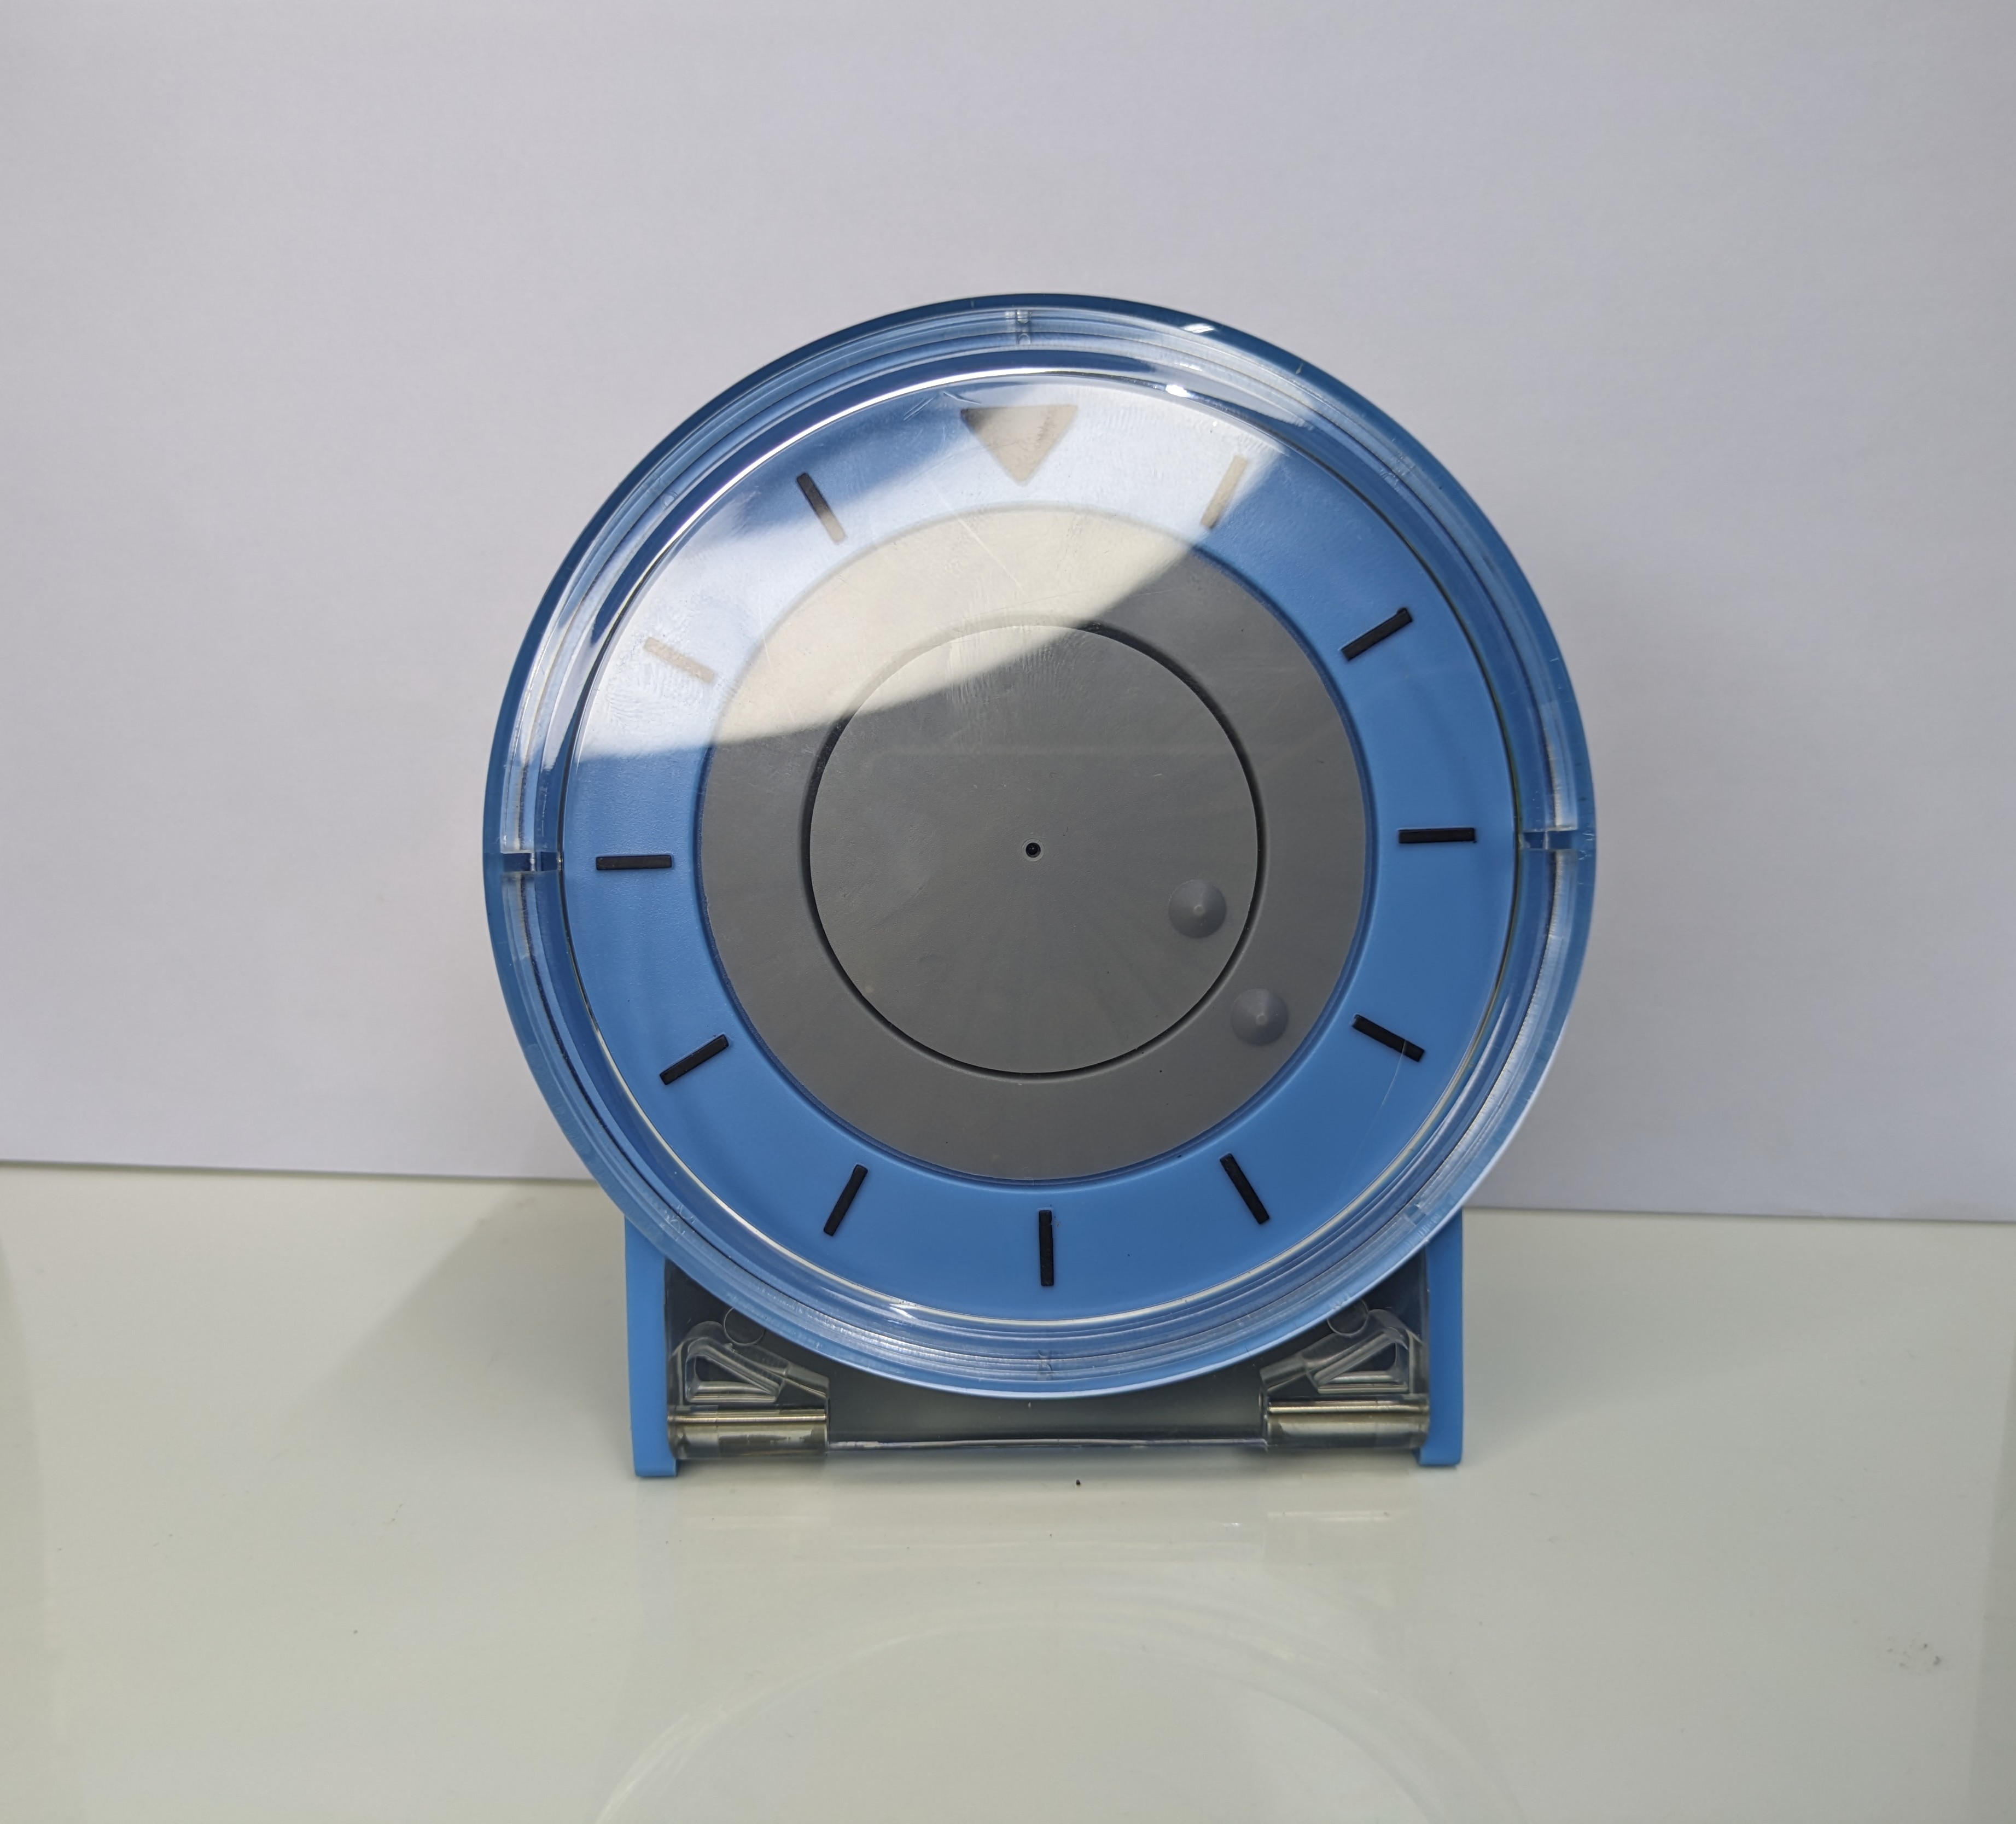 talking table clock with bed shacker image